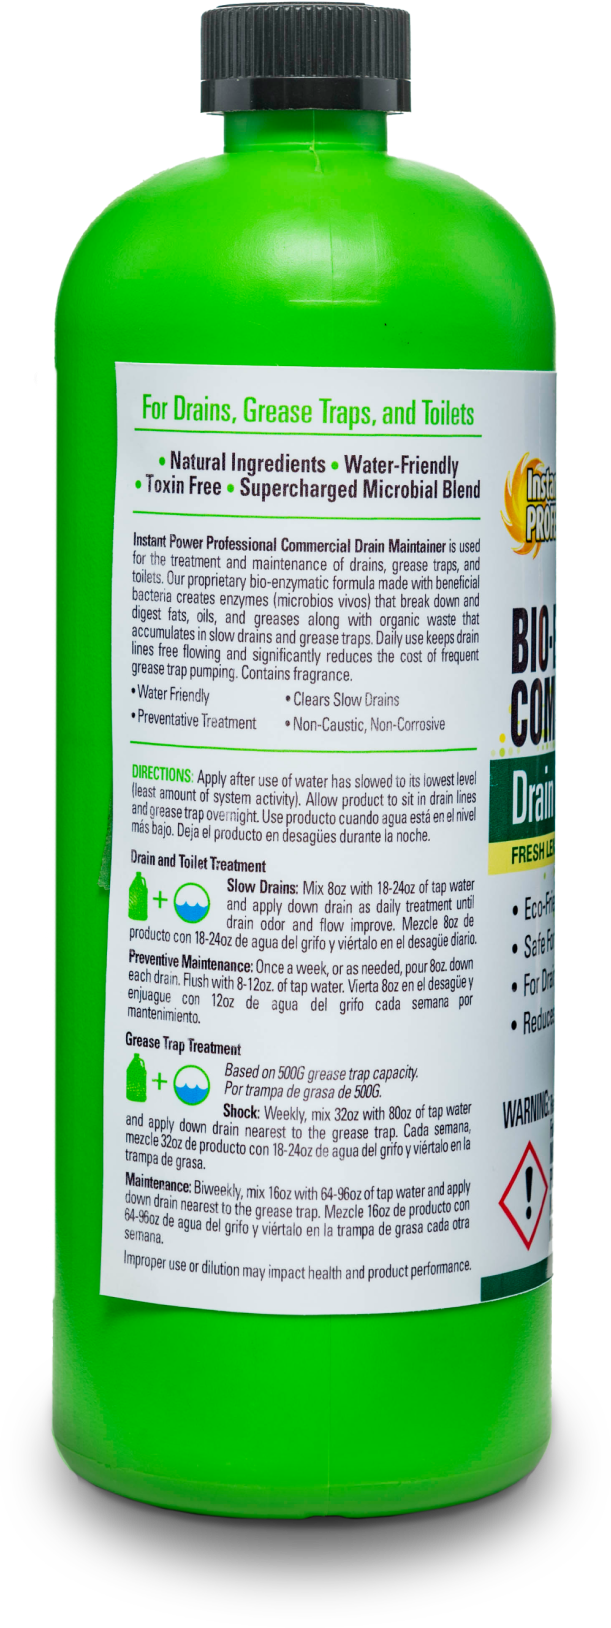 Instant Power Commercial Drain Maintainer - Liquid Enzyme Clog Remover,  Cleans and Deodorizes, Reduces Drain Blockages, 1 Gal